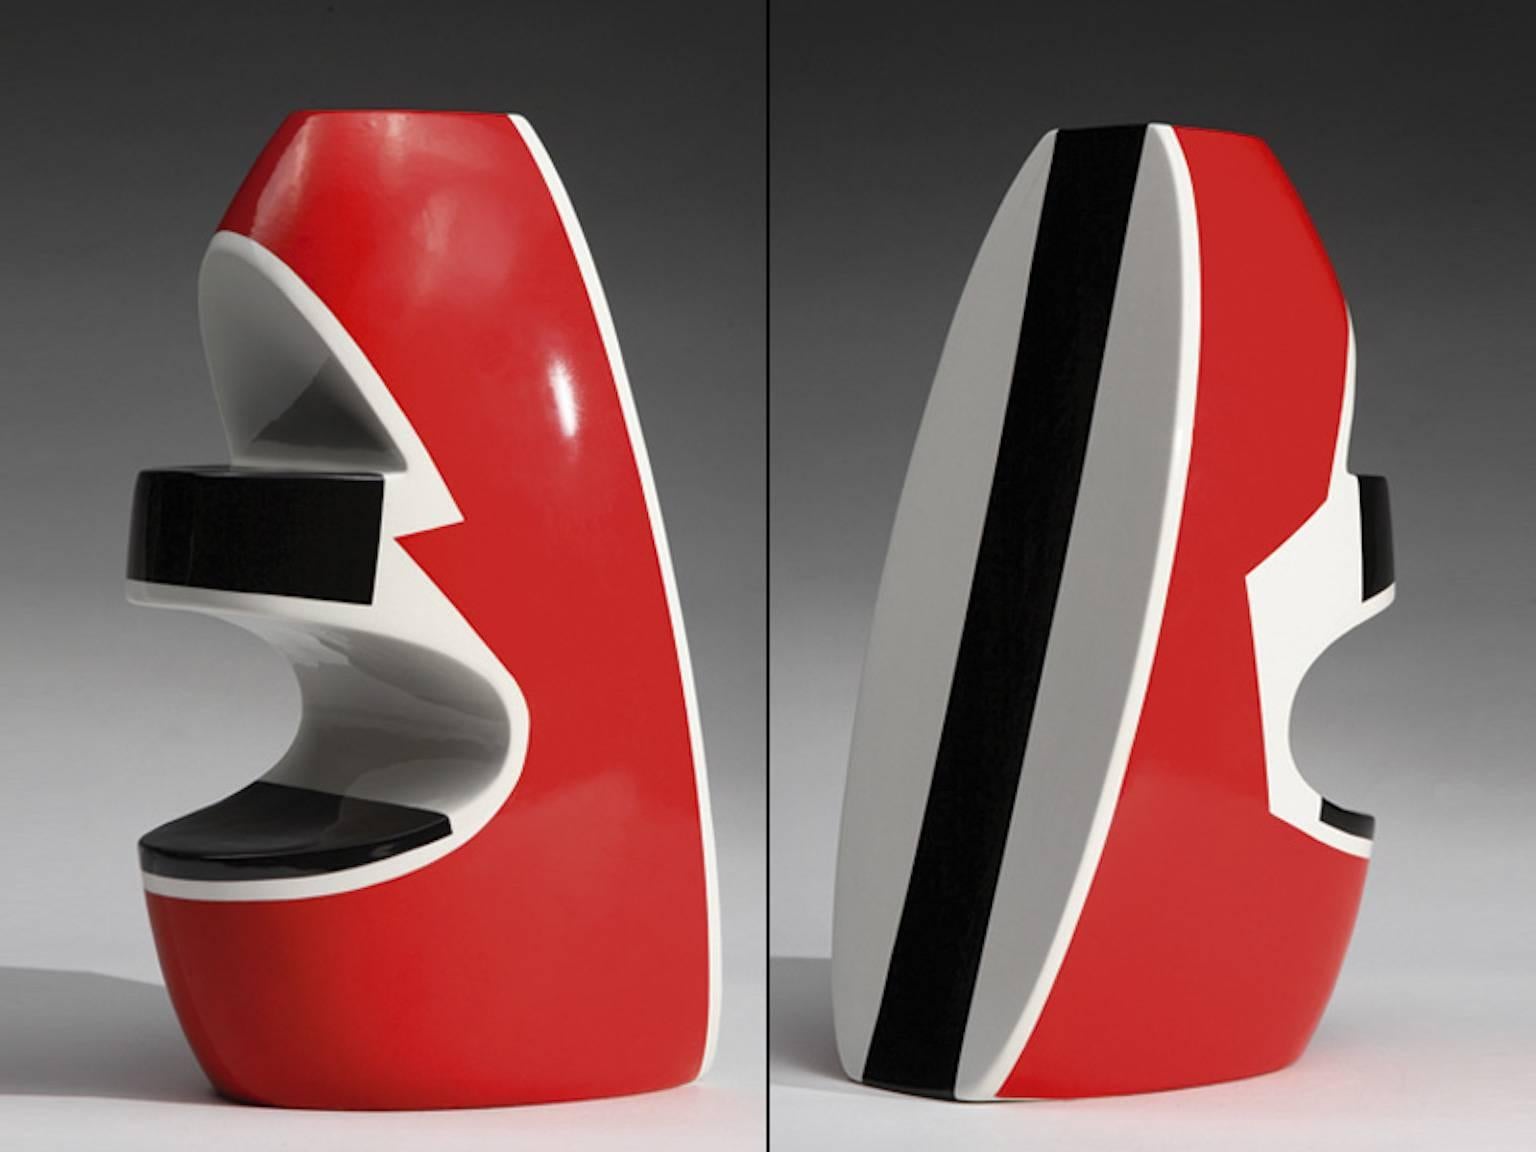 Red ceramic vase of the RedYellowBlack collection designed by George Sowden and produced by Superego Editions. Limited edition of 50 pieces. Signed and numbered.

Biography
George J. Sowden is a designer with experience in various fields of